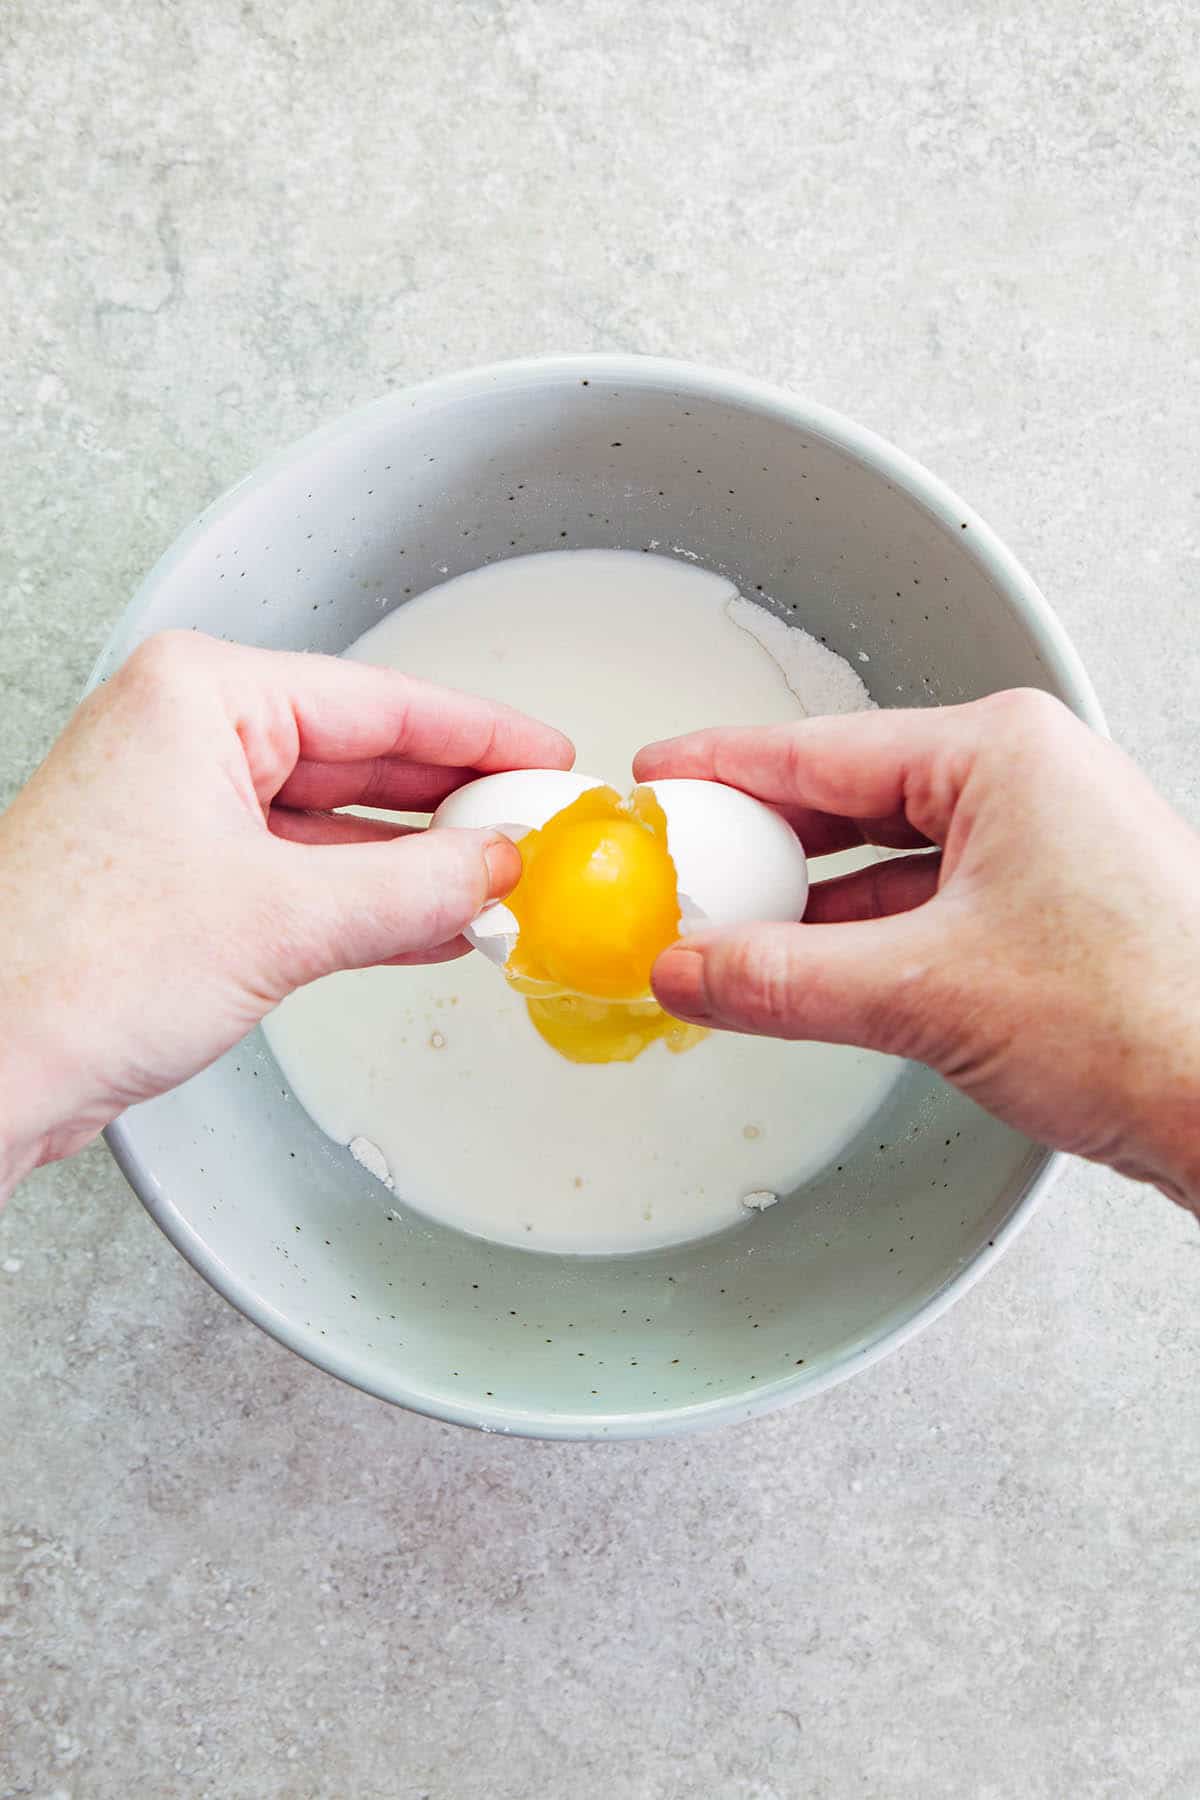 Hands cracking an egg into a bowl of batter.